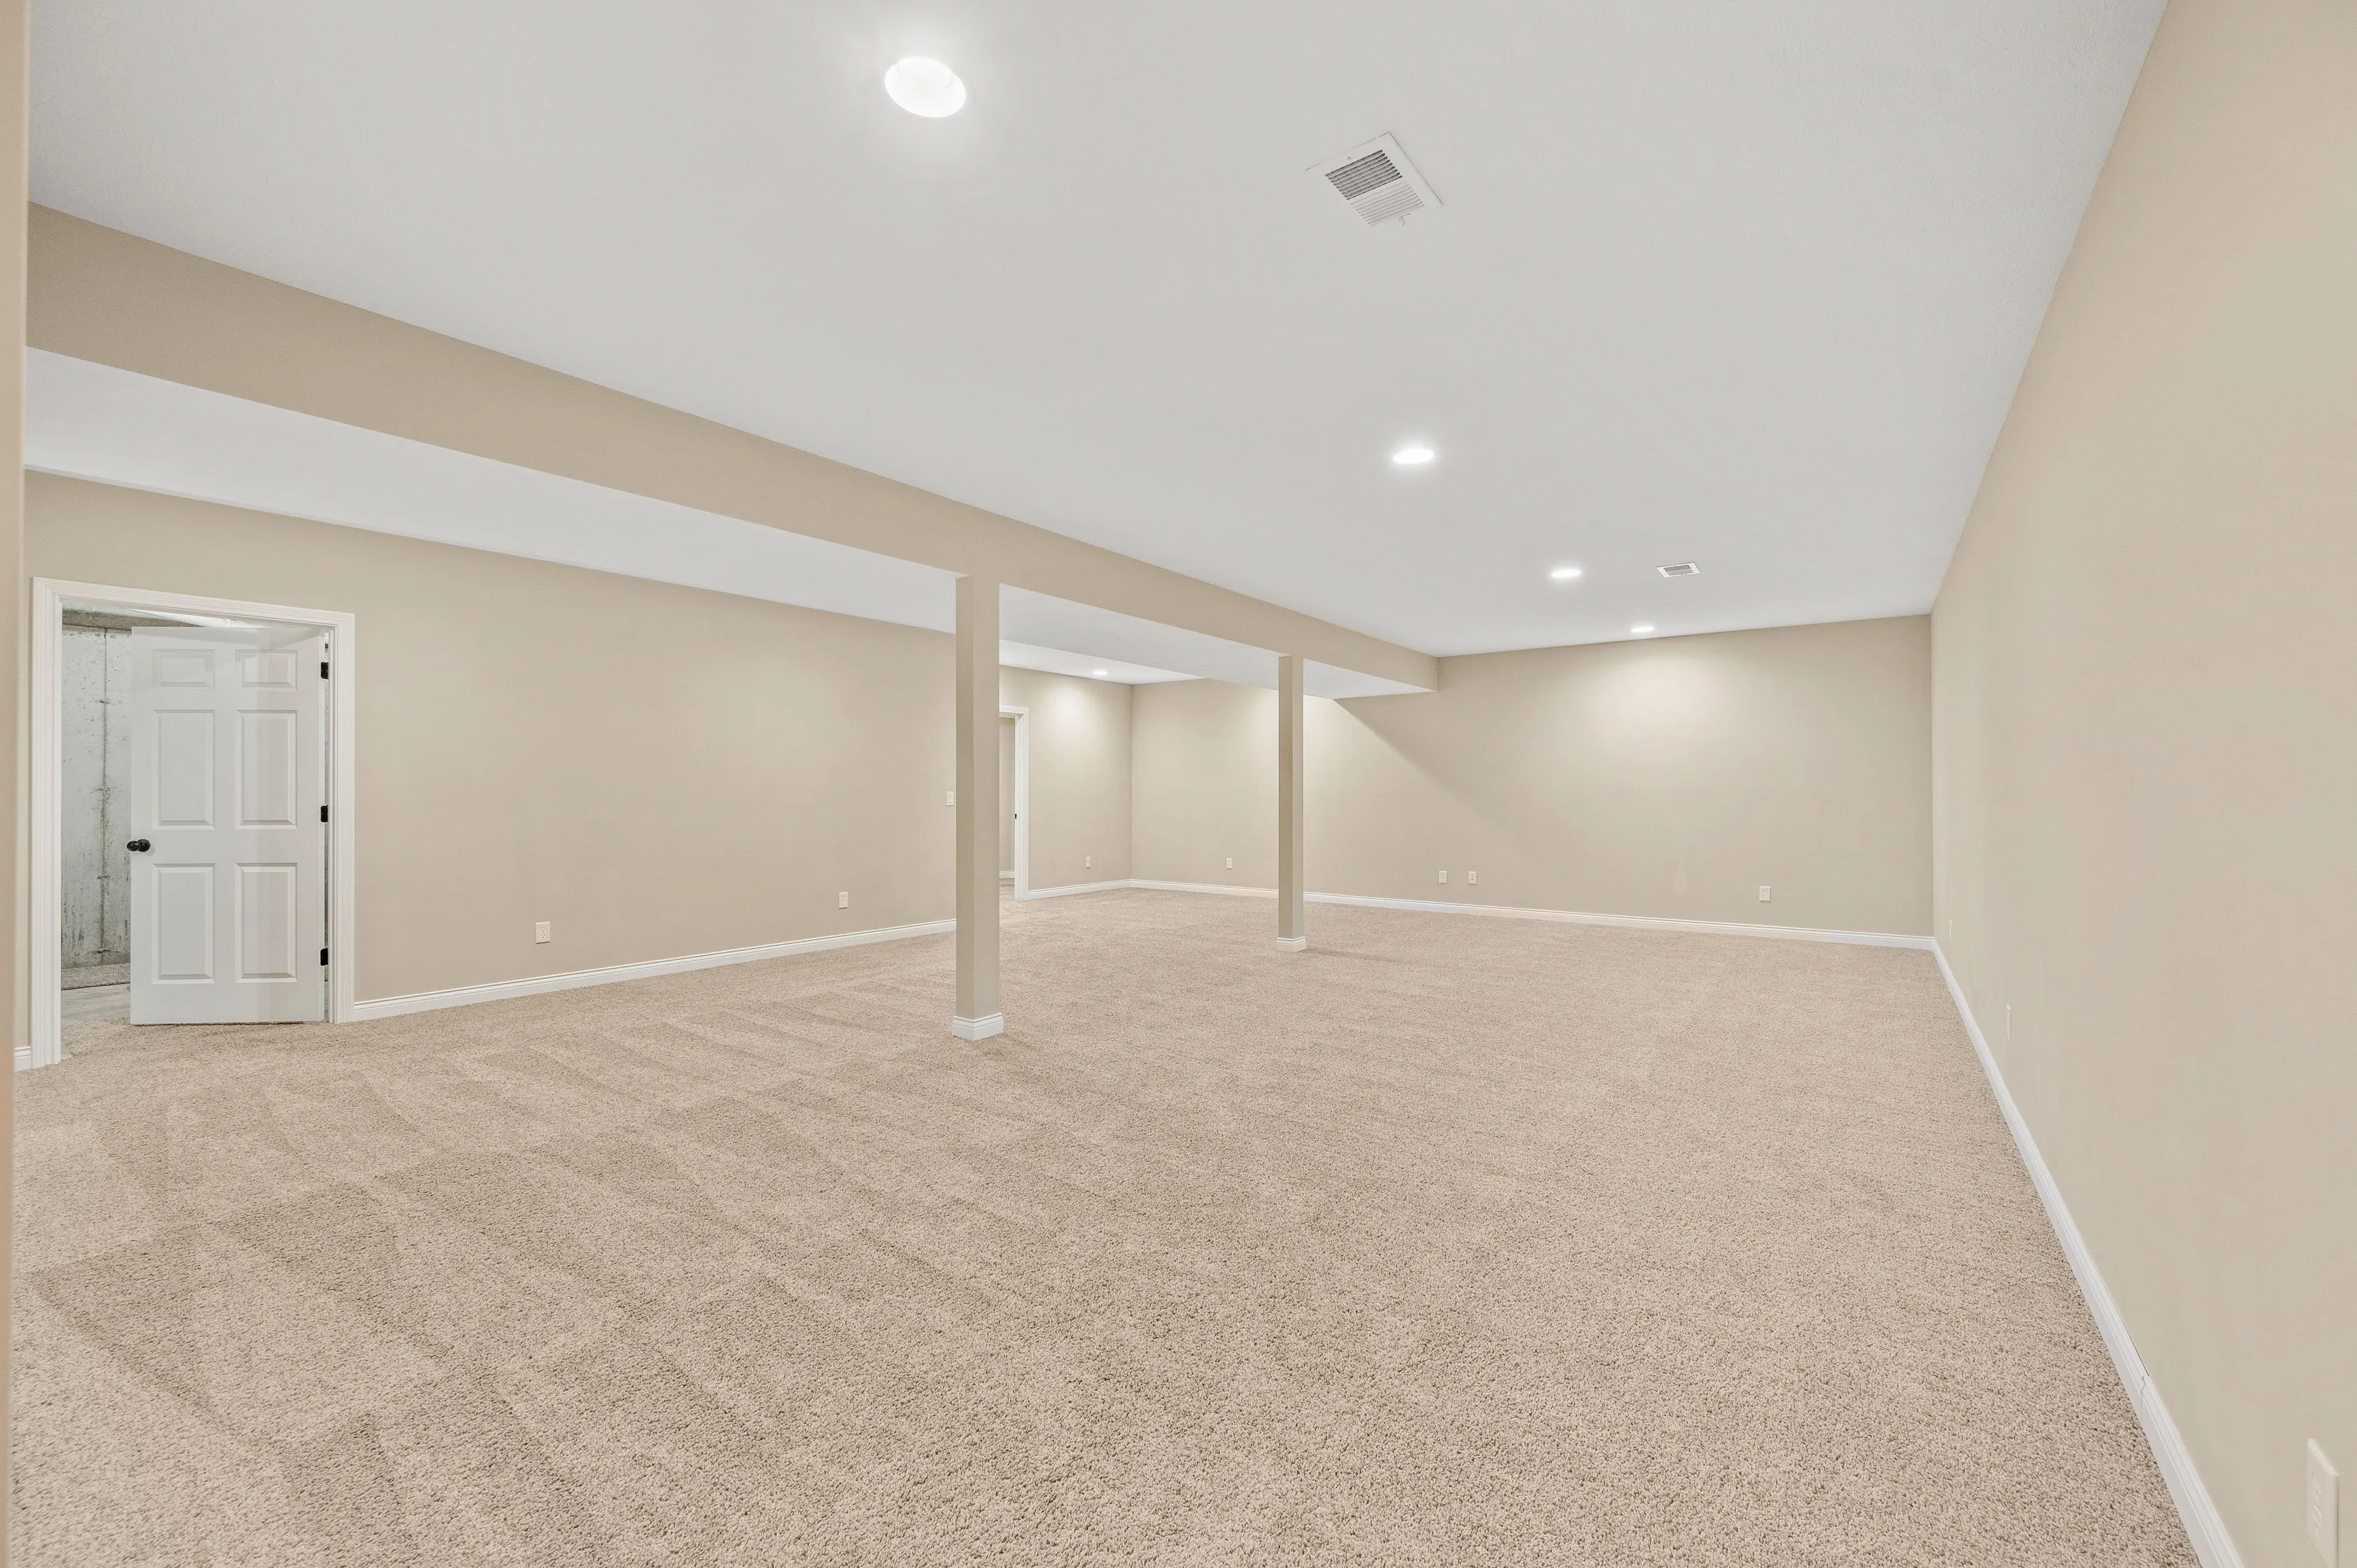 Interior of an empty basement room with beige carpet, white walls, and multiple support columns.